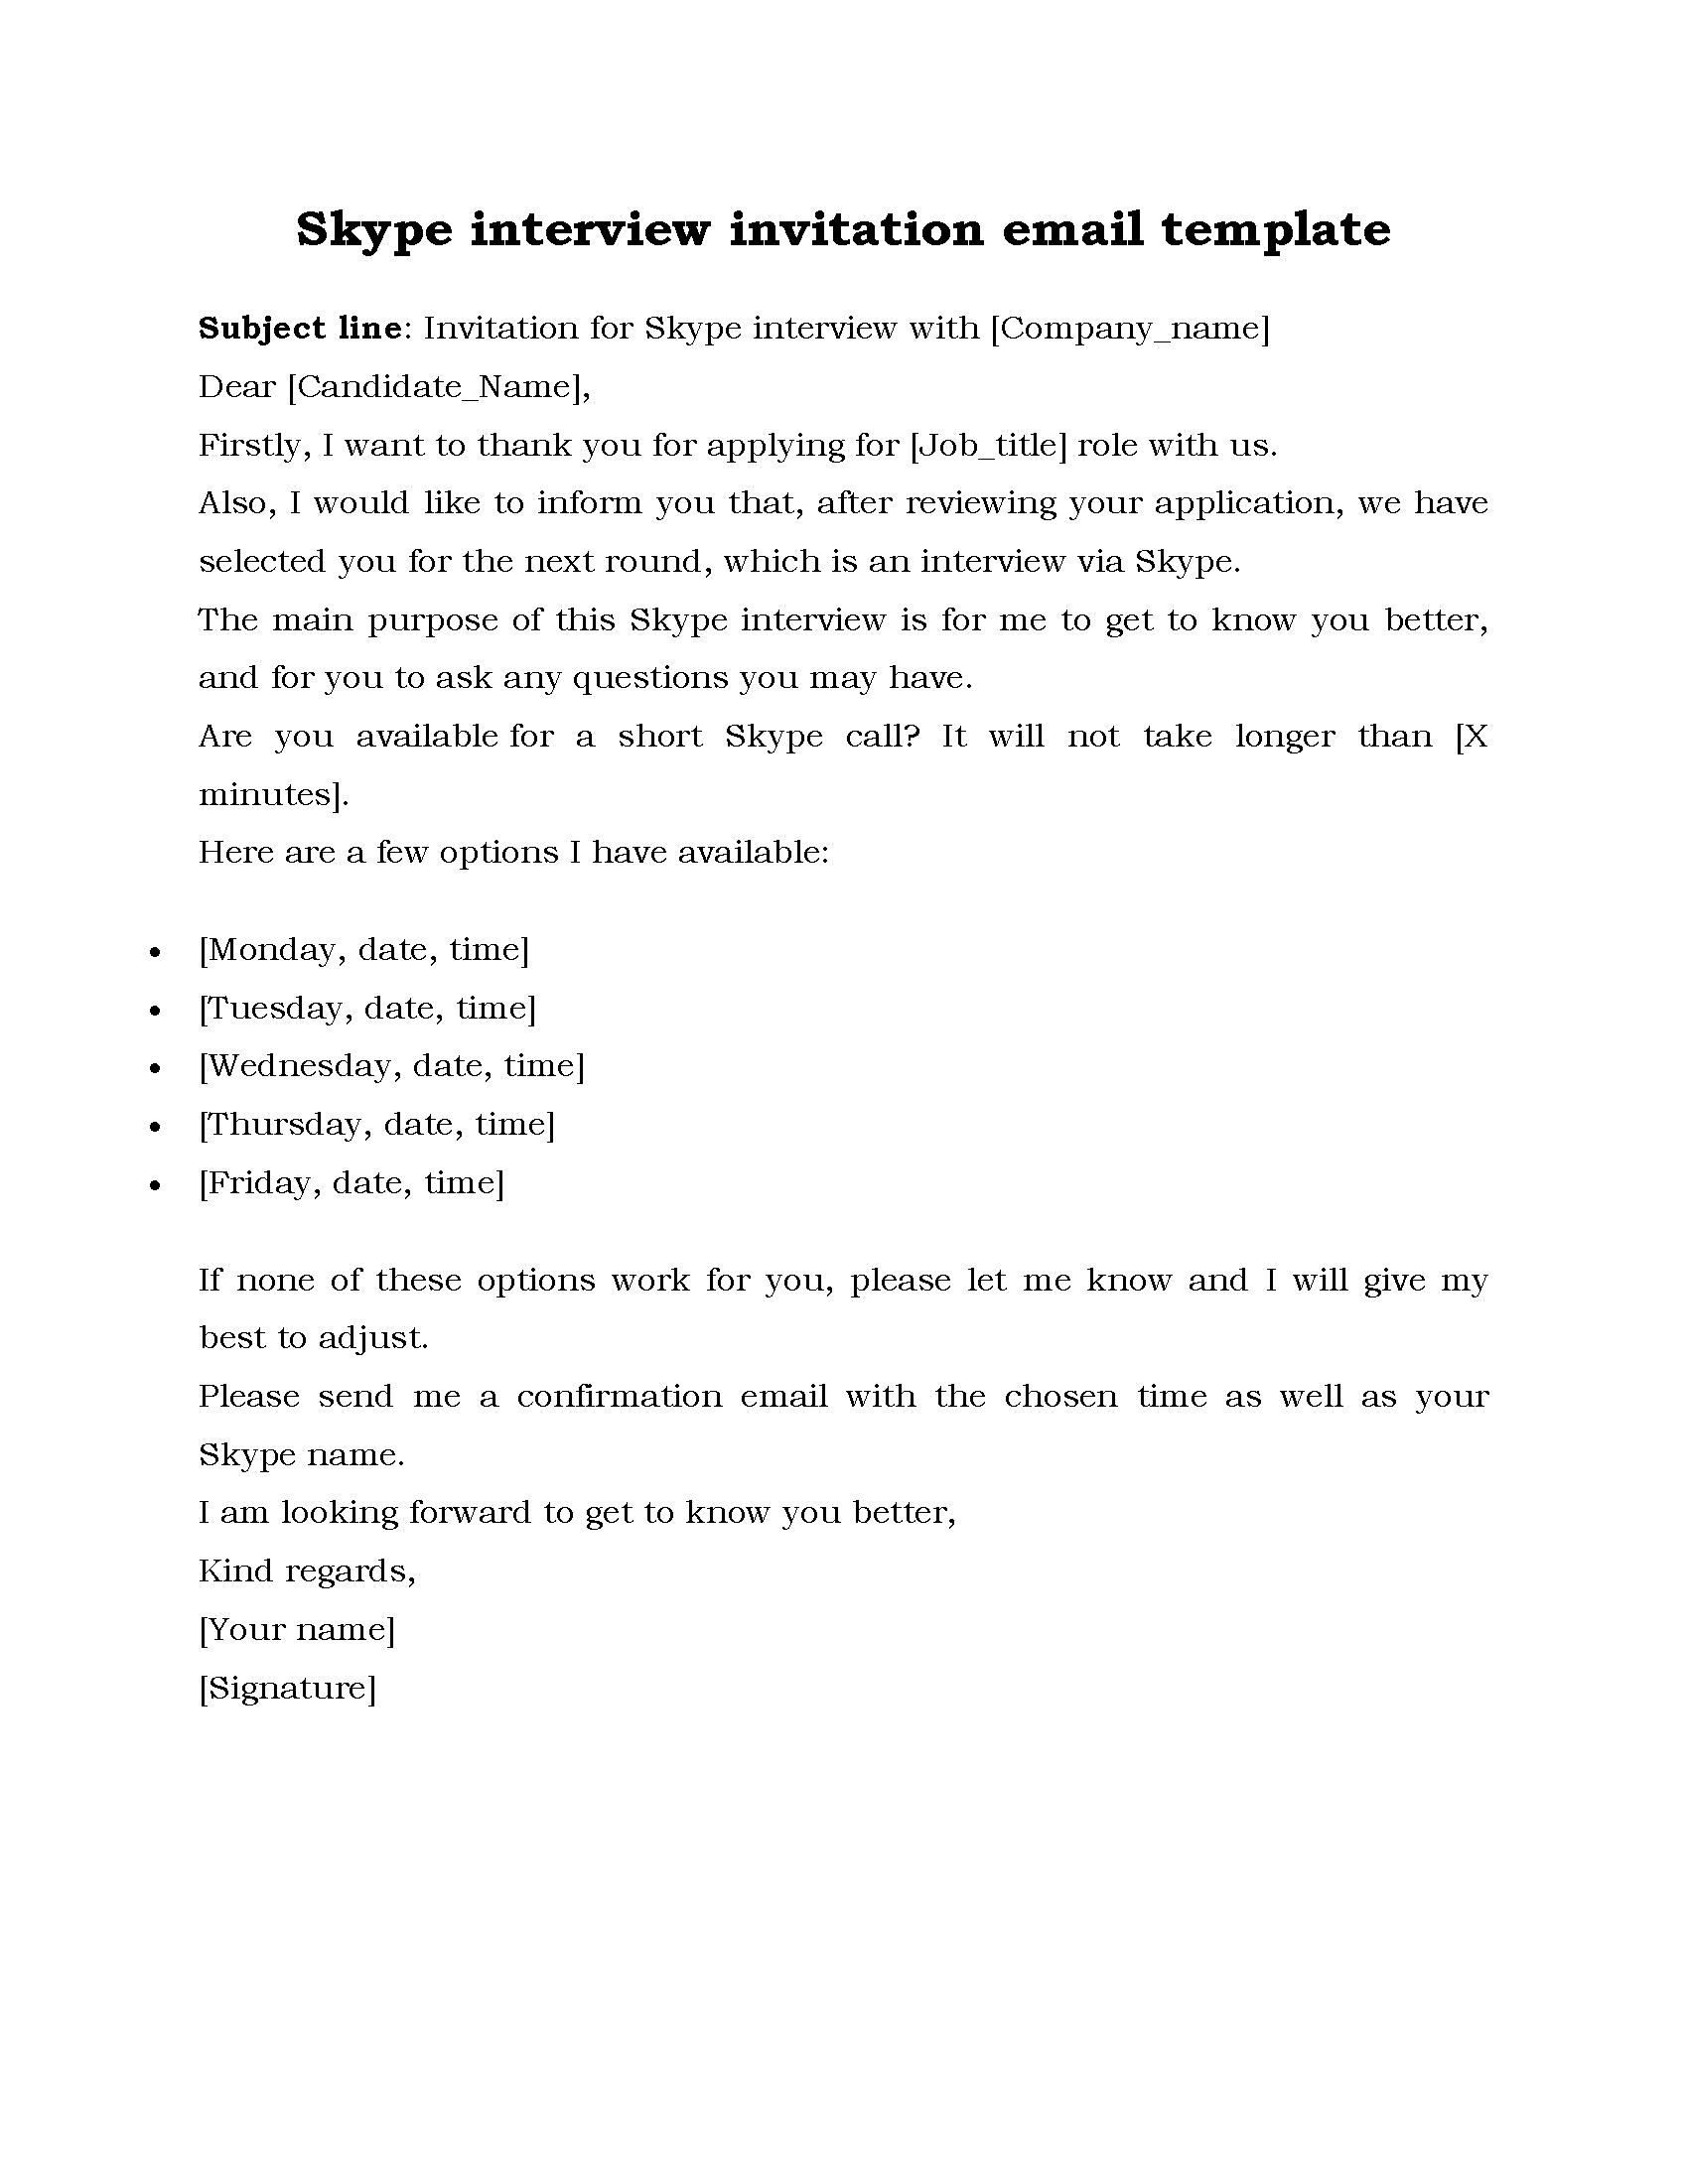 17- Skype-interview-invitation-email-template